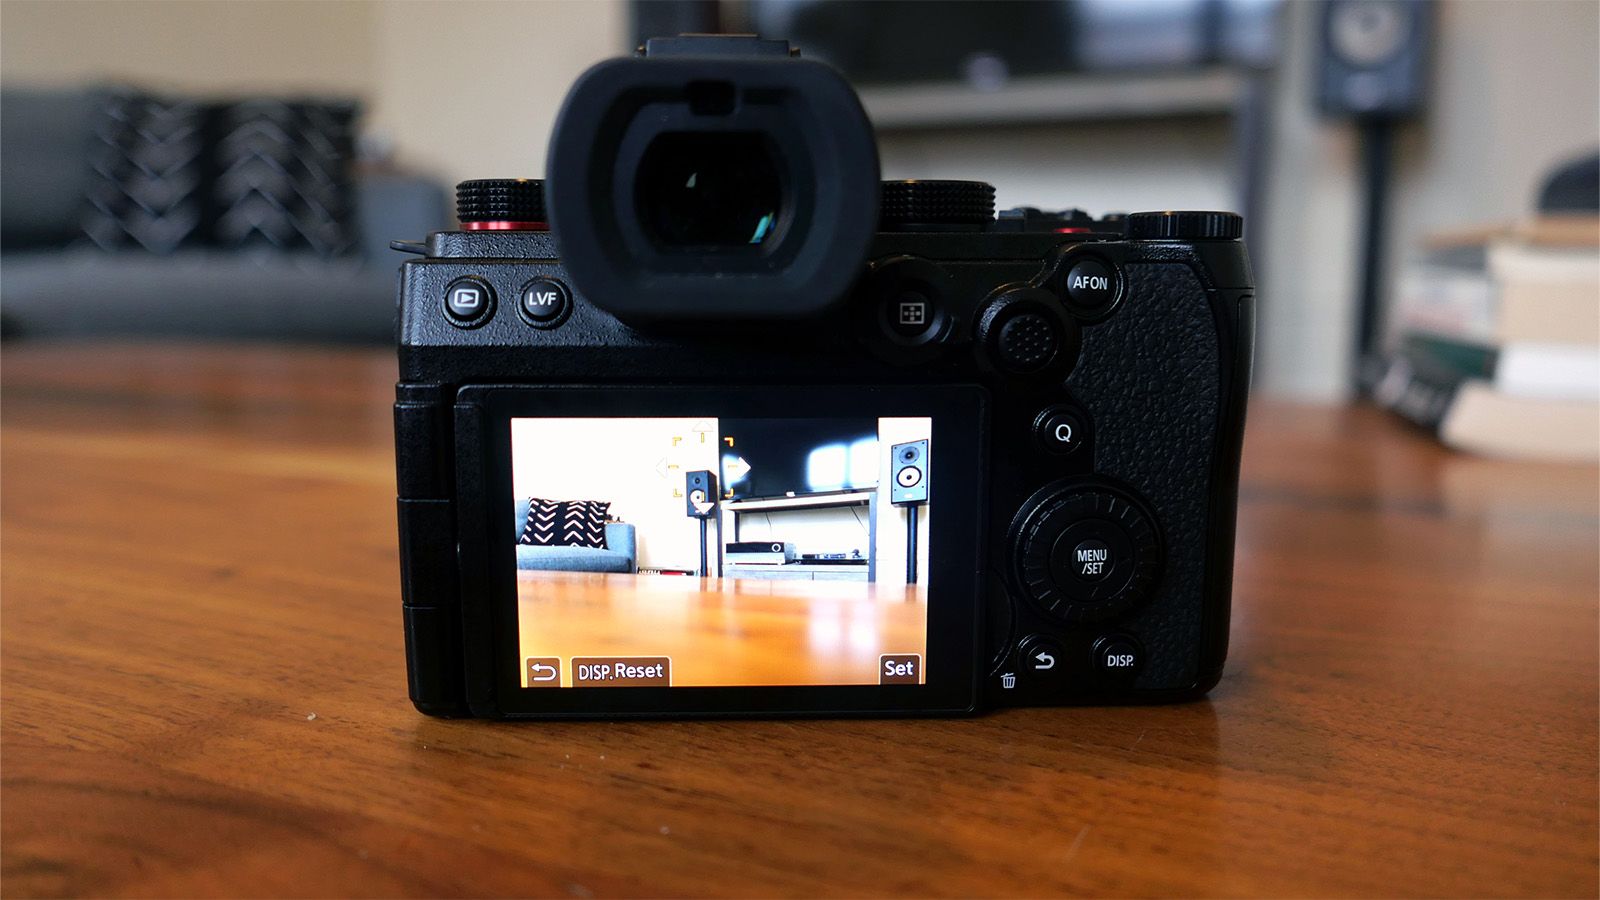 Panasonic S5 II review: The full-frame vlogging camera you've been